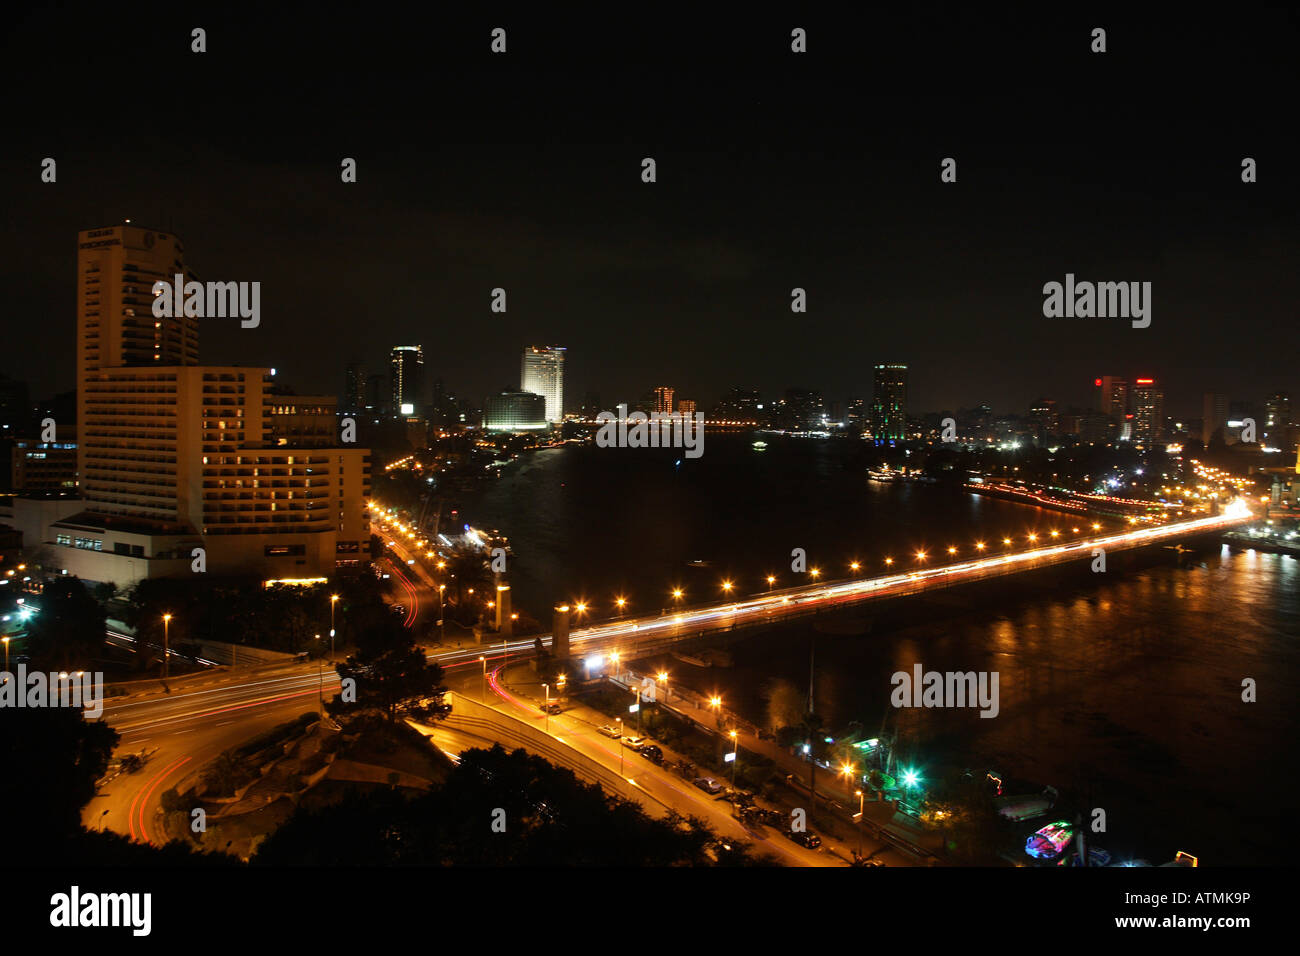 Cairo and the Nile seen from the Hotel Hilton at night. Stock Photo